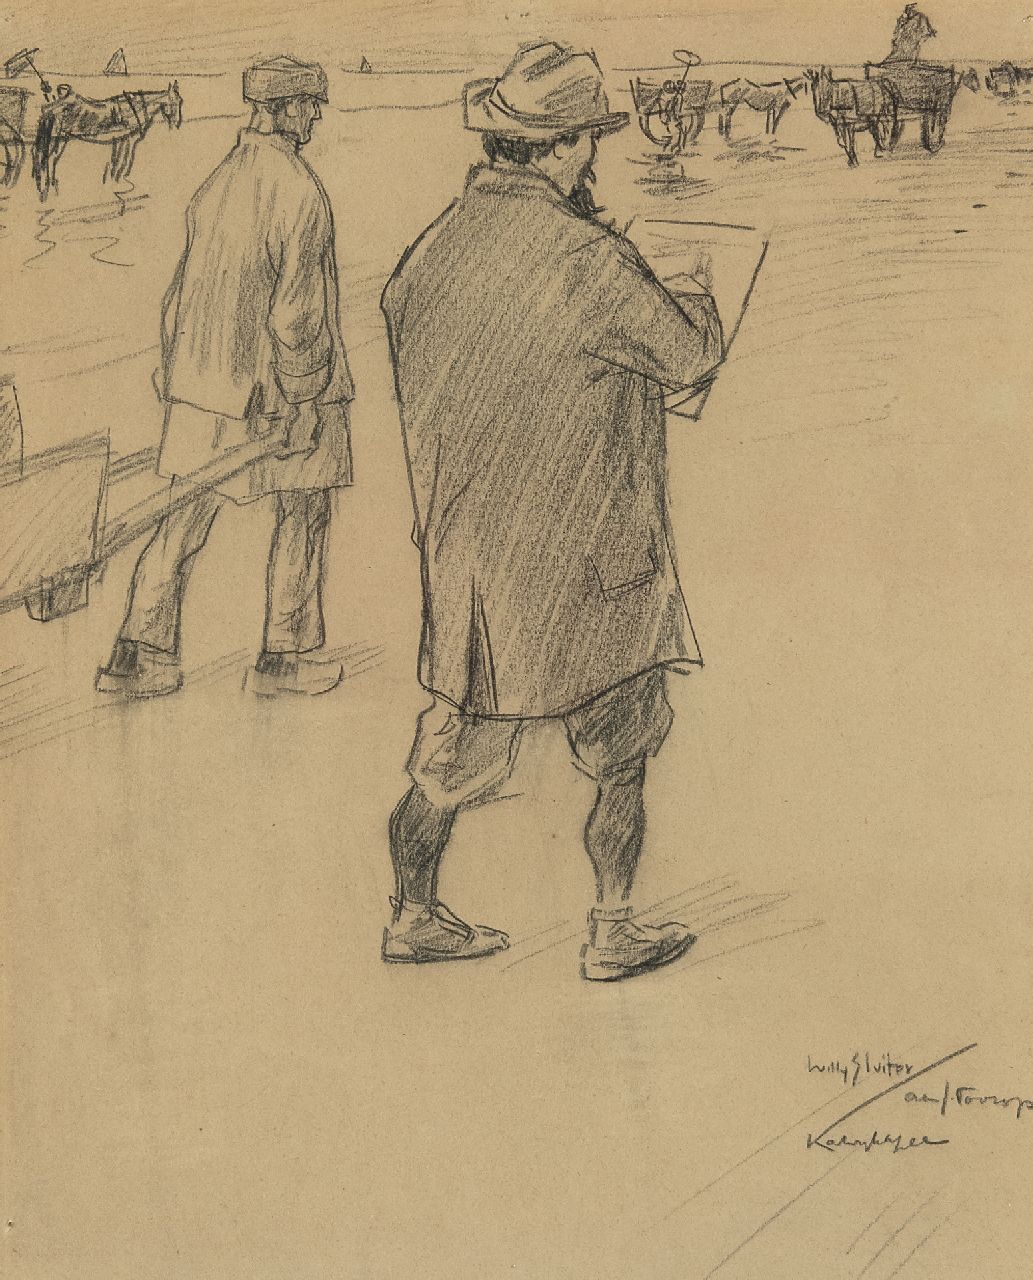 Sluiter J.W.  | Jan Willem 'Willy' Sluiter | Watercolours and drawings offered for sale | Jan Toorop sketching on the beach of Katwijk aan Zee, black chalk on paper 32.6 x 27.0 cm, signed l.r. and executed ca. 1898